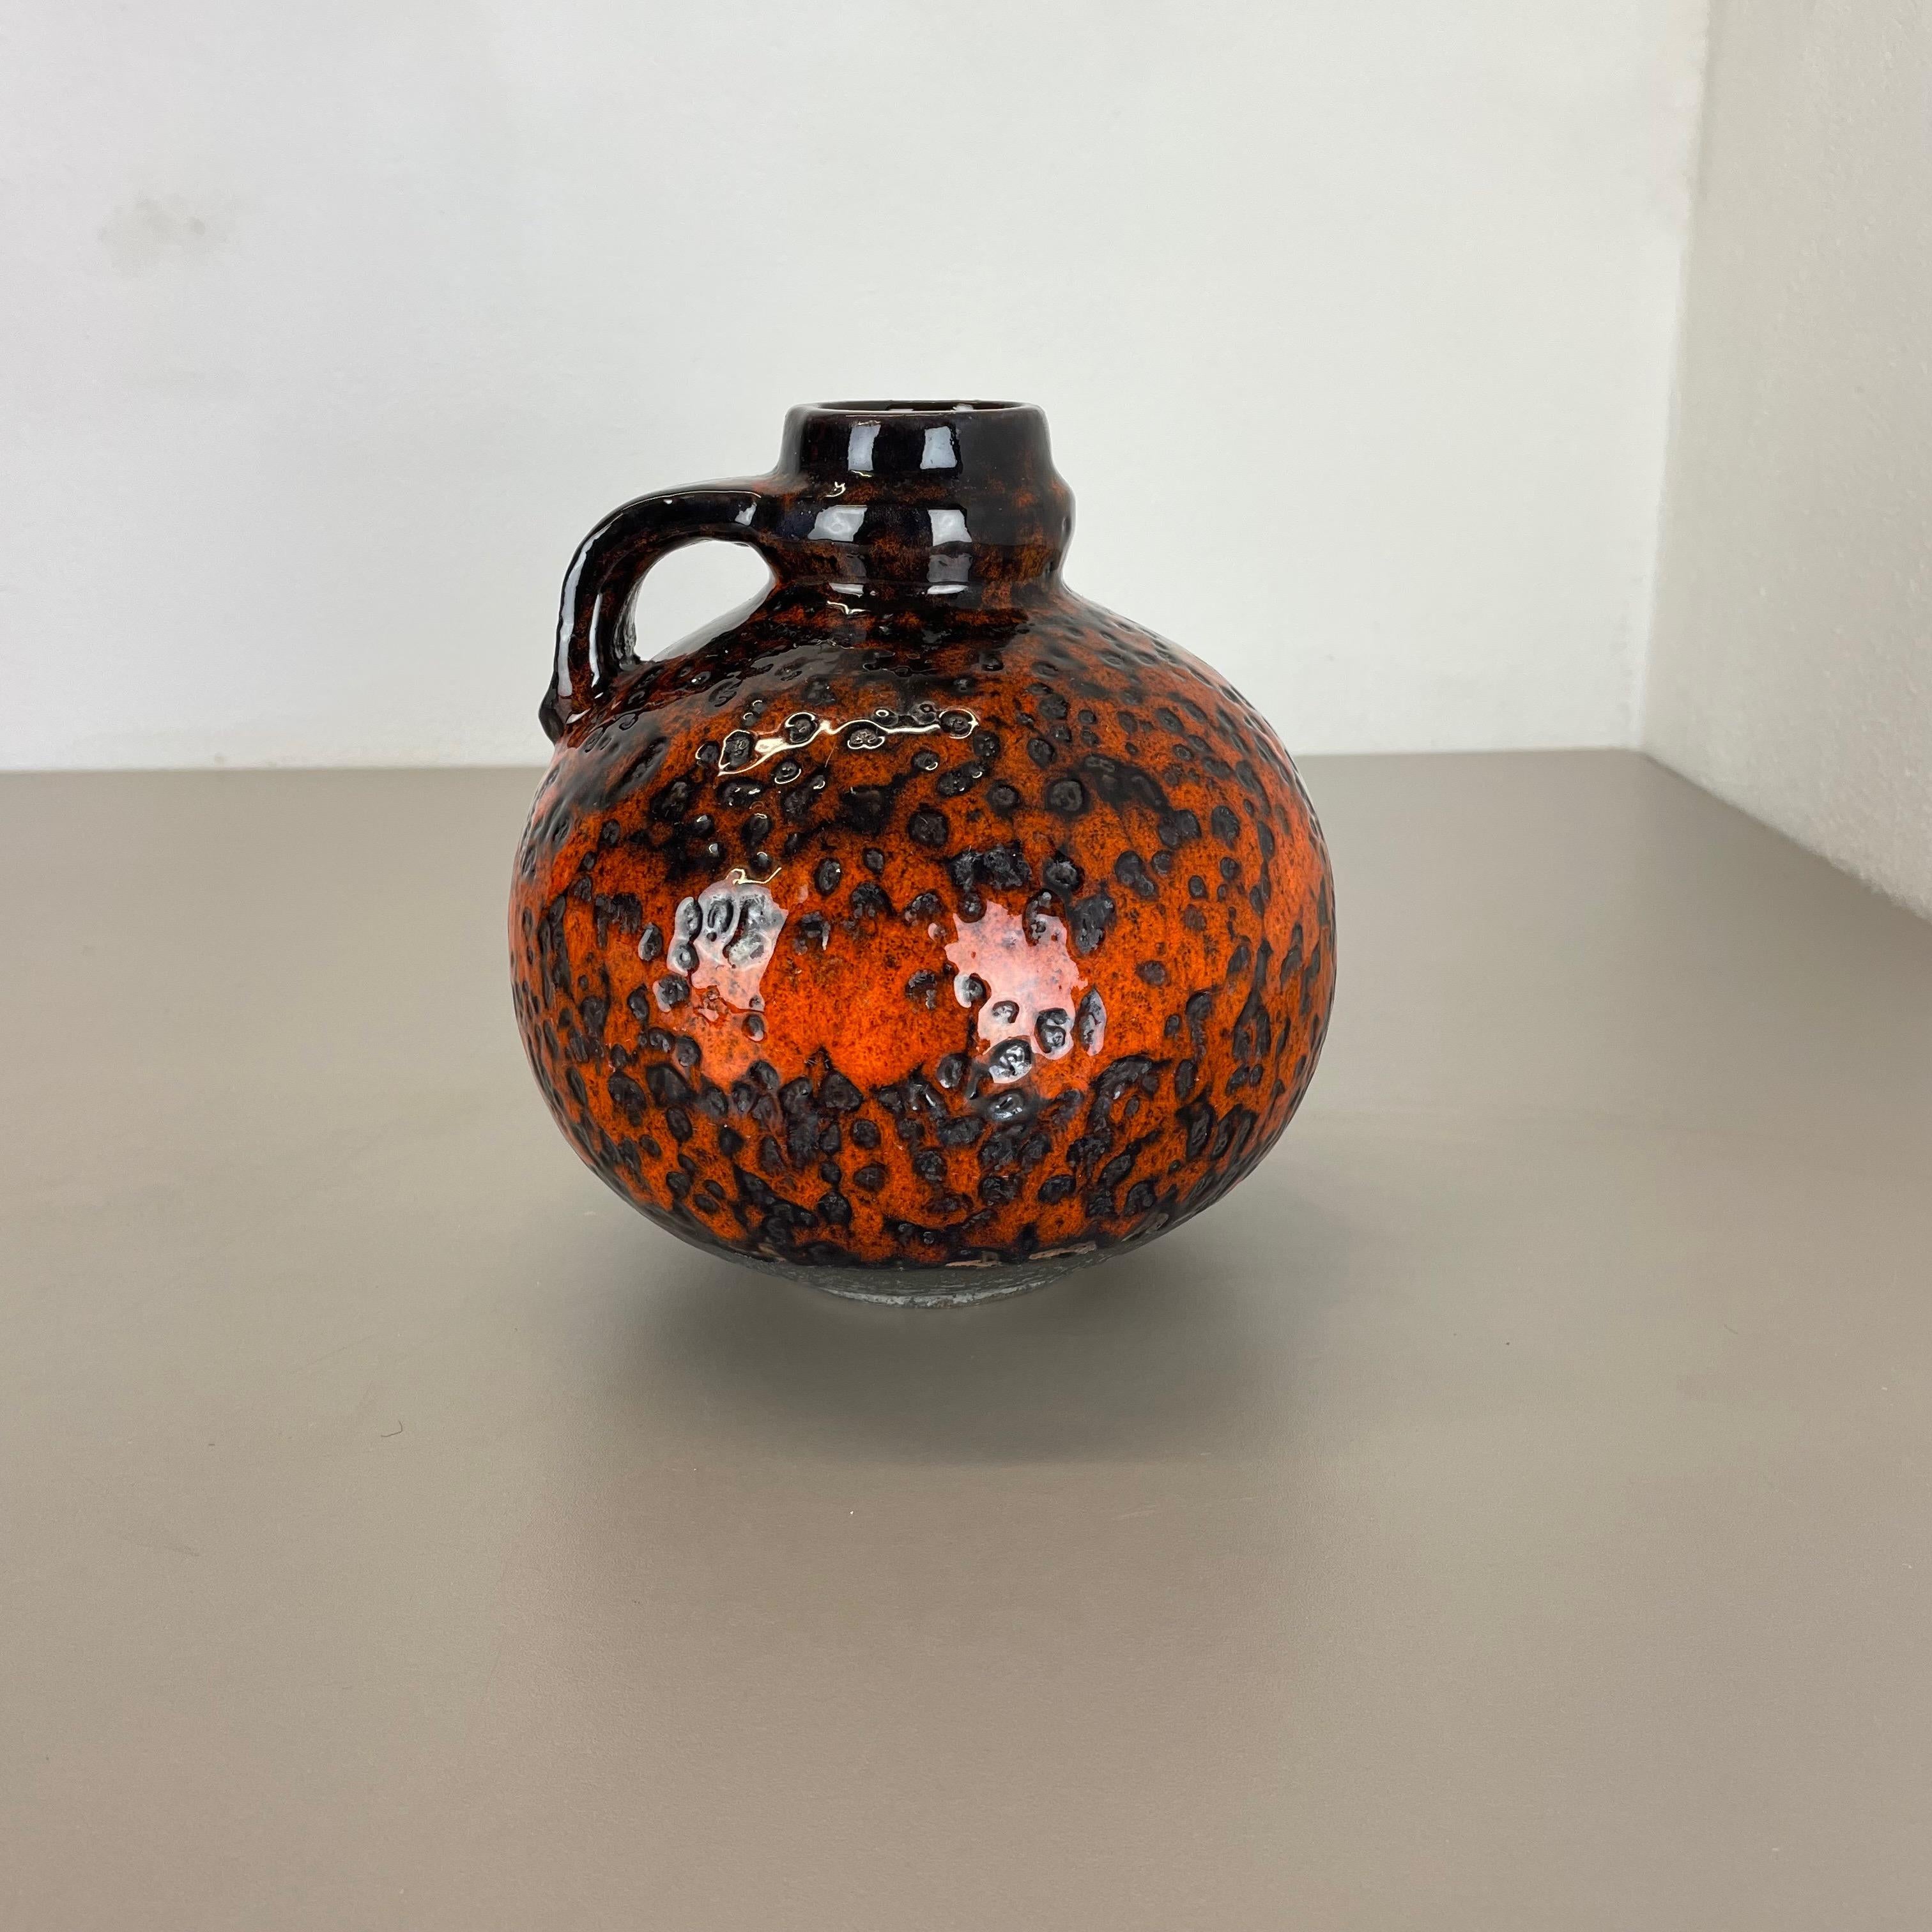 Article:

Ceramic pottery vase


Origin:

Germany


Designer:

Heinz Siery


Producer:

Carstens Tönnieshof, Germany


Decade:

1970s


This original vintage pottery object was designed by Heinz Siery and produced by Cartens